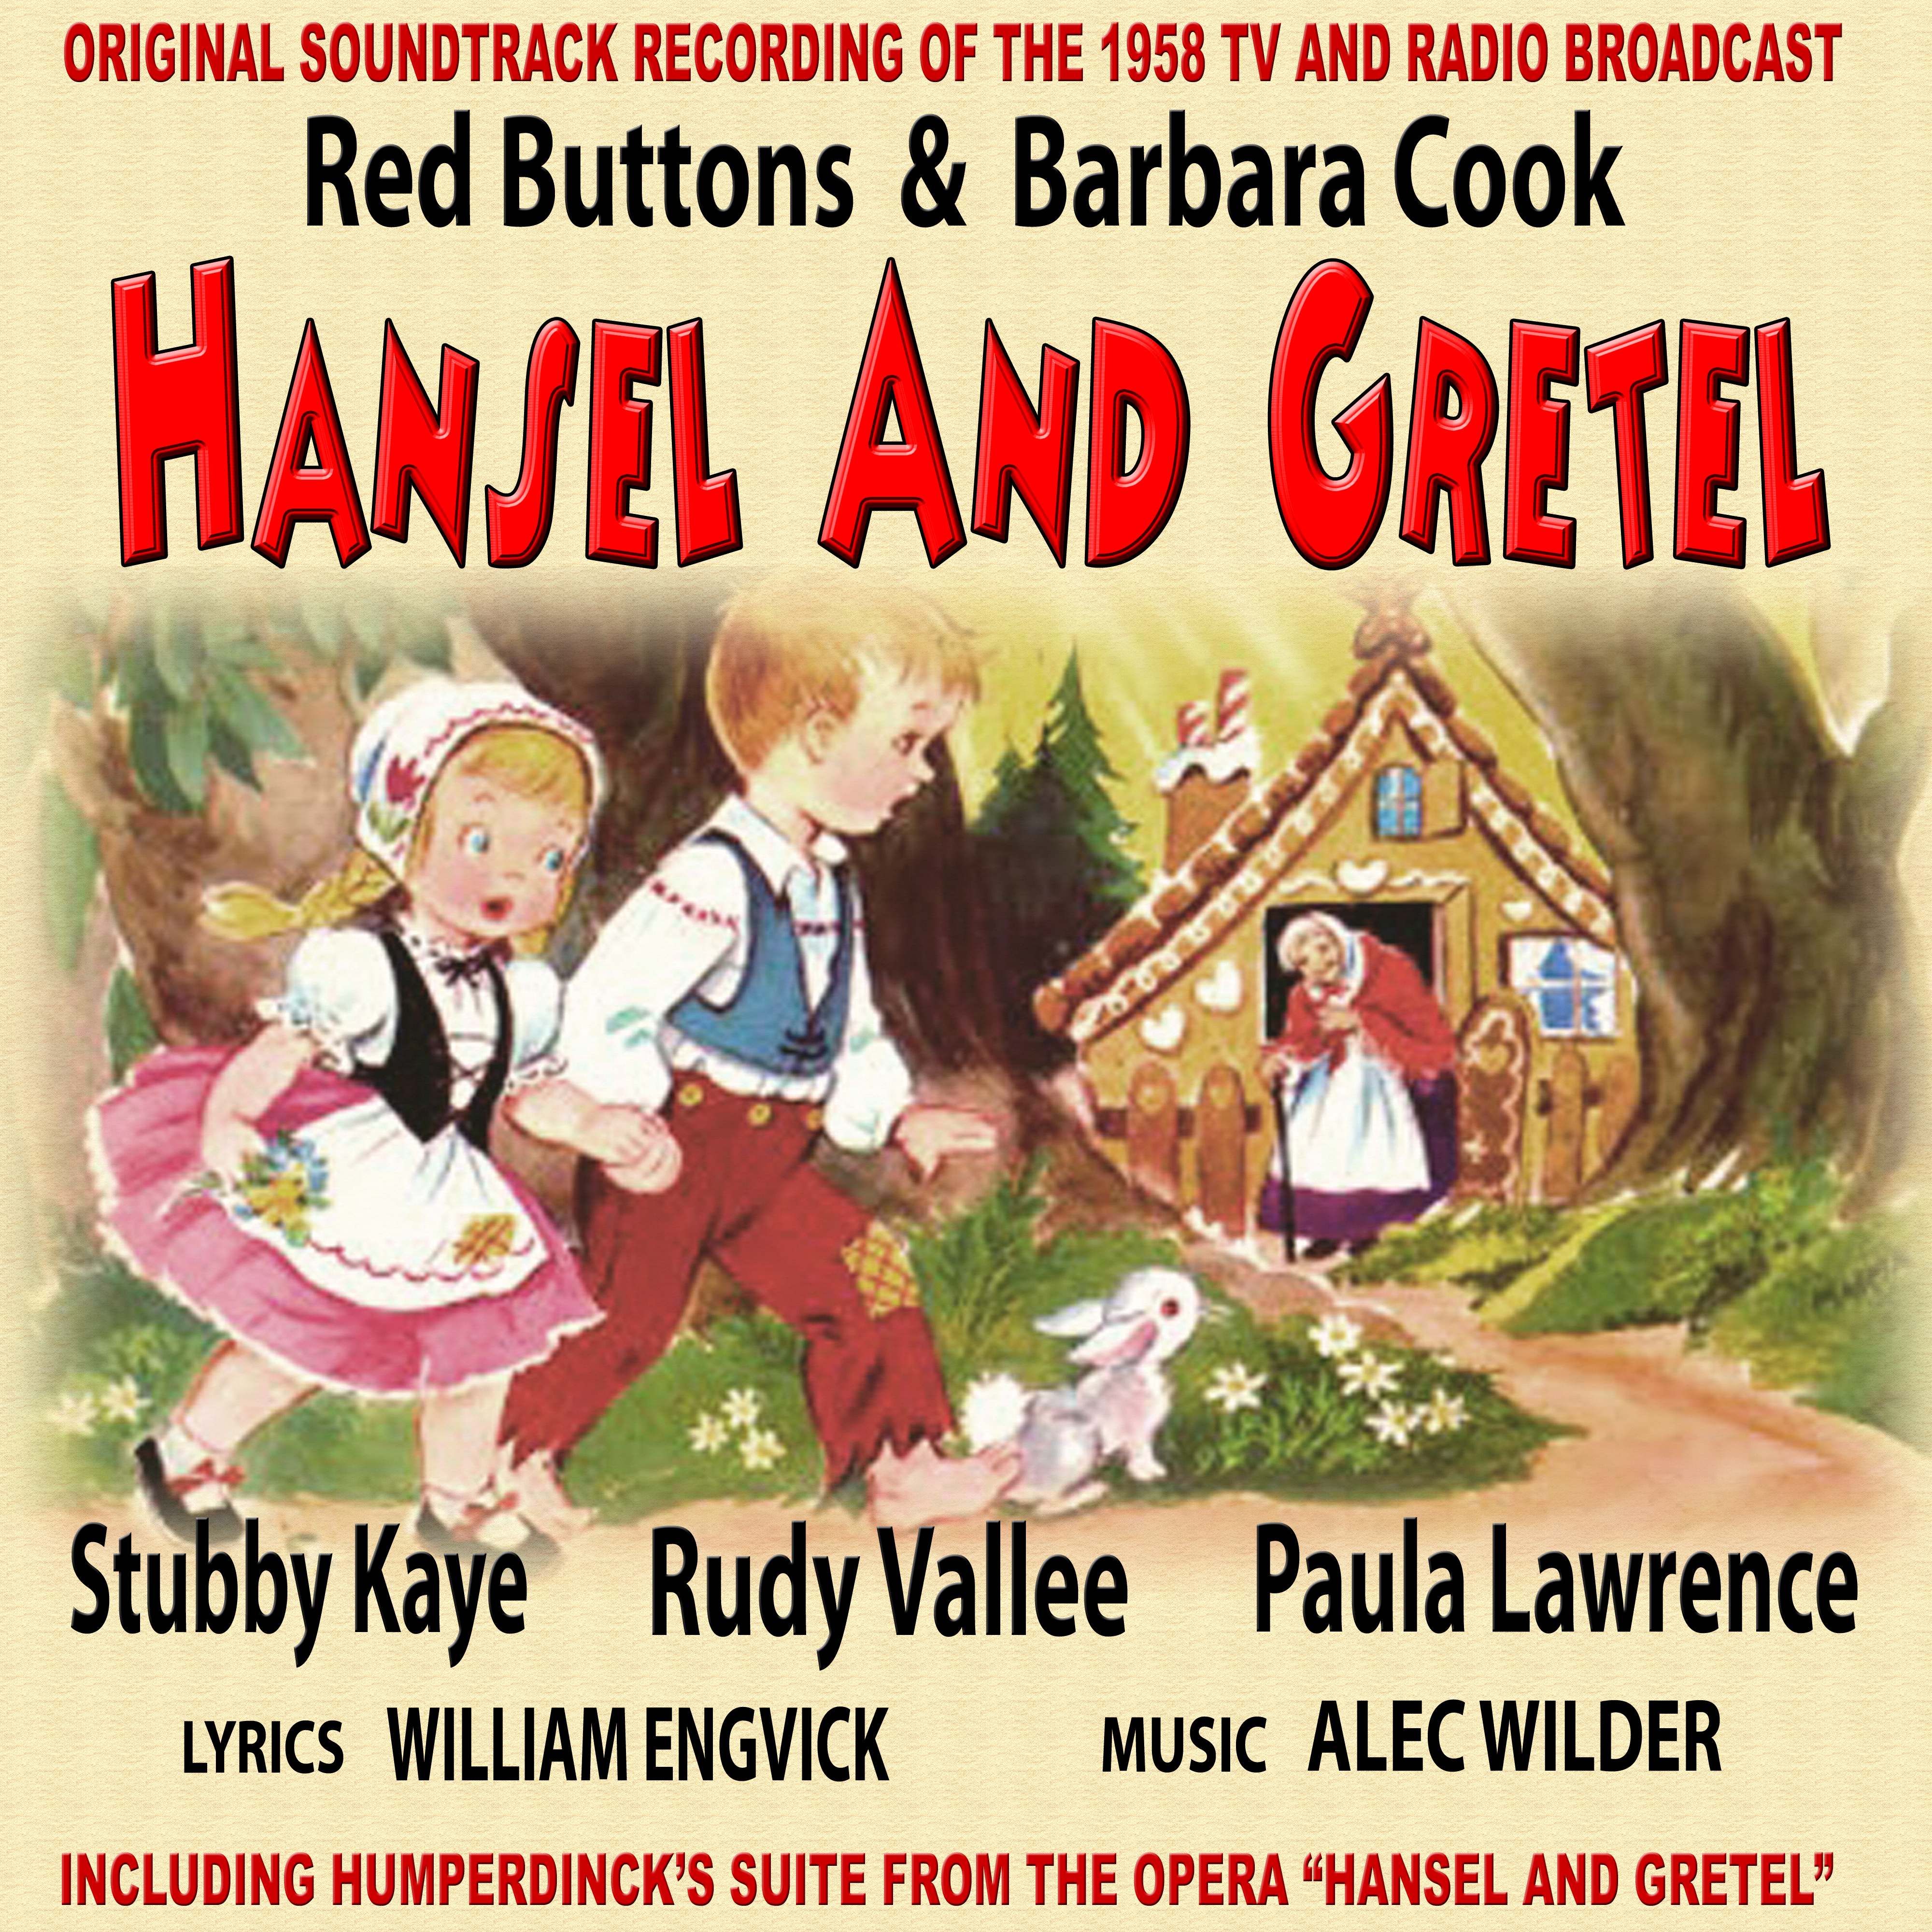 Hansel and Gretel: The Hansel and Gretel Song / Market Today / Men Rule the World / Evening Song / Morning Song / Eenie Meenie, Mynie Moe / What Are Little Girls Made Of / Finale